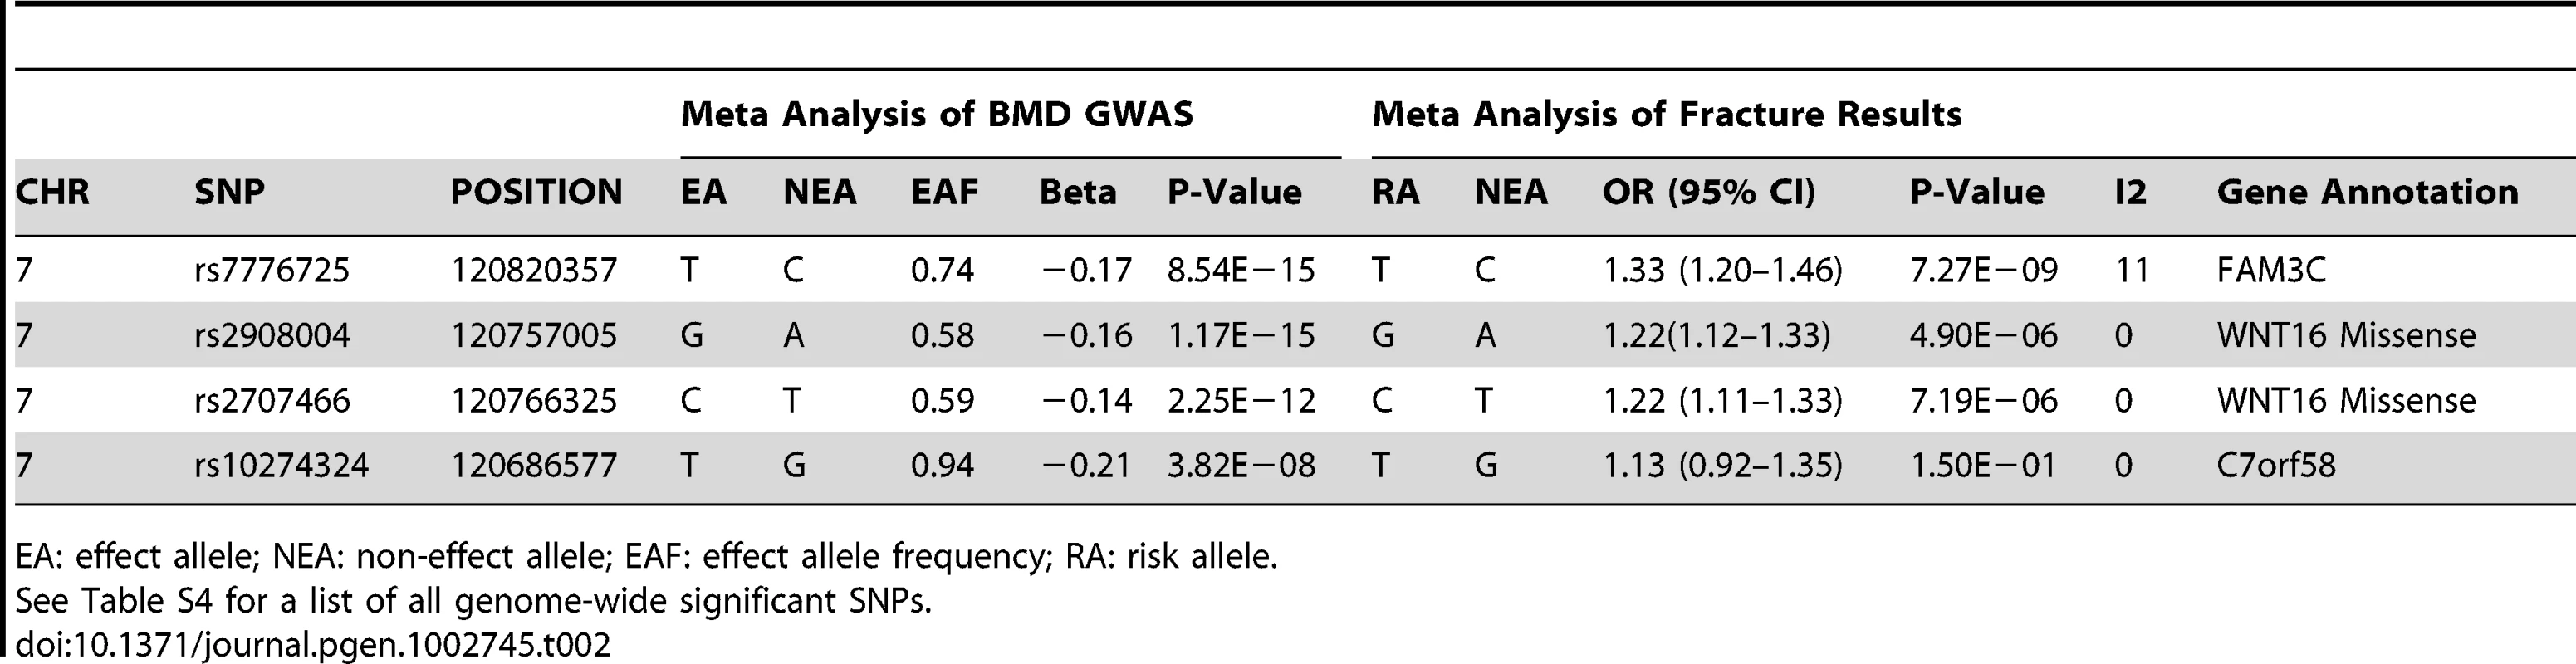 Association results of forearm BMD meta-analysis and fracture for selected SNPs.